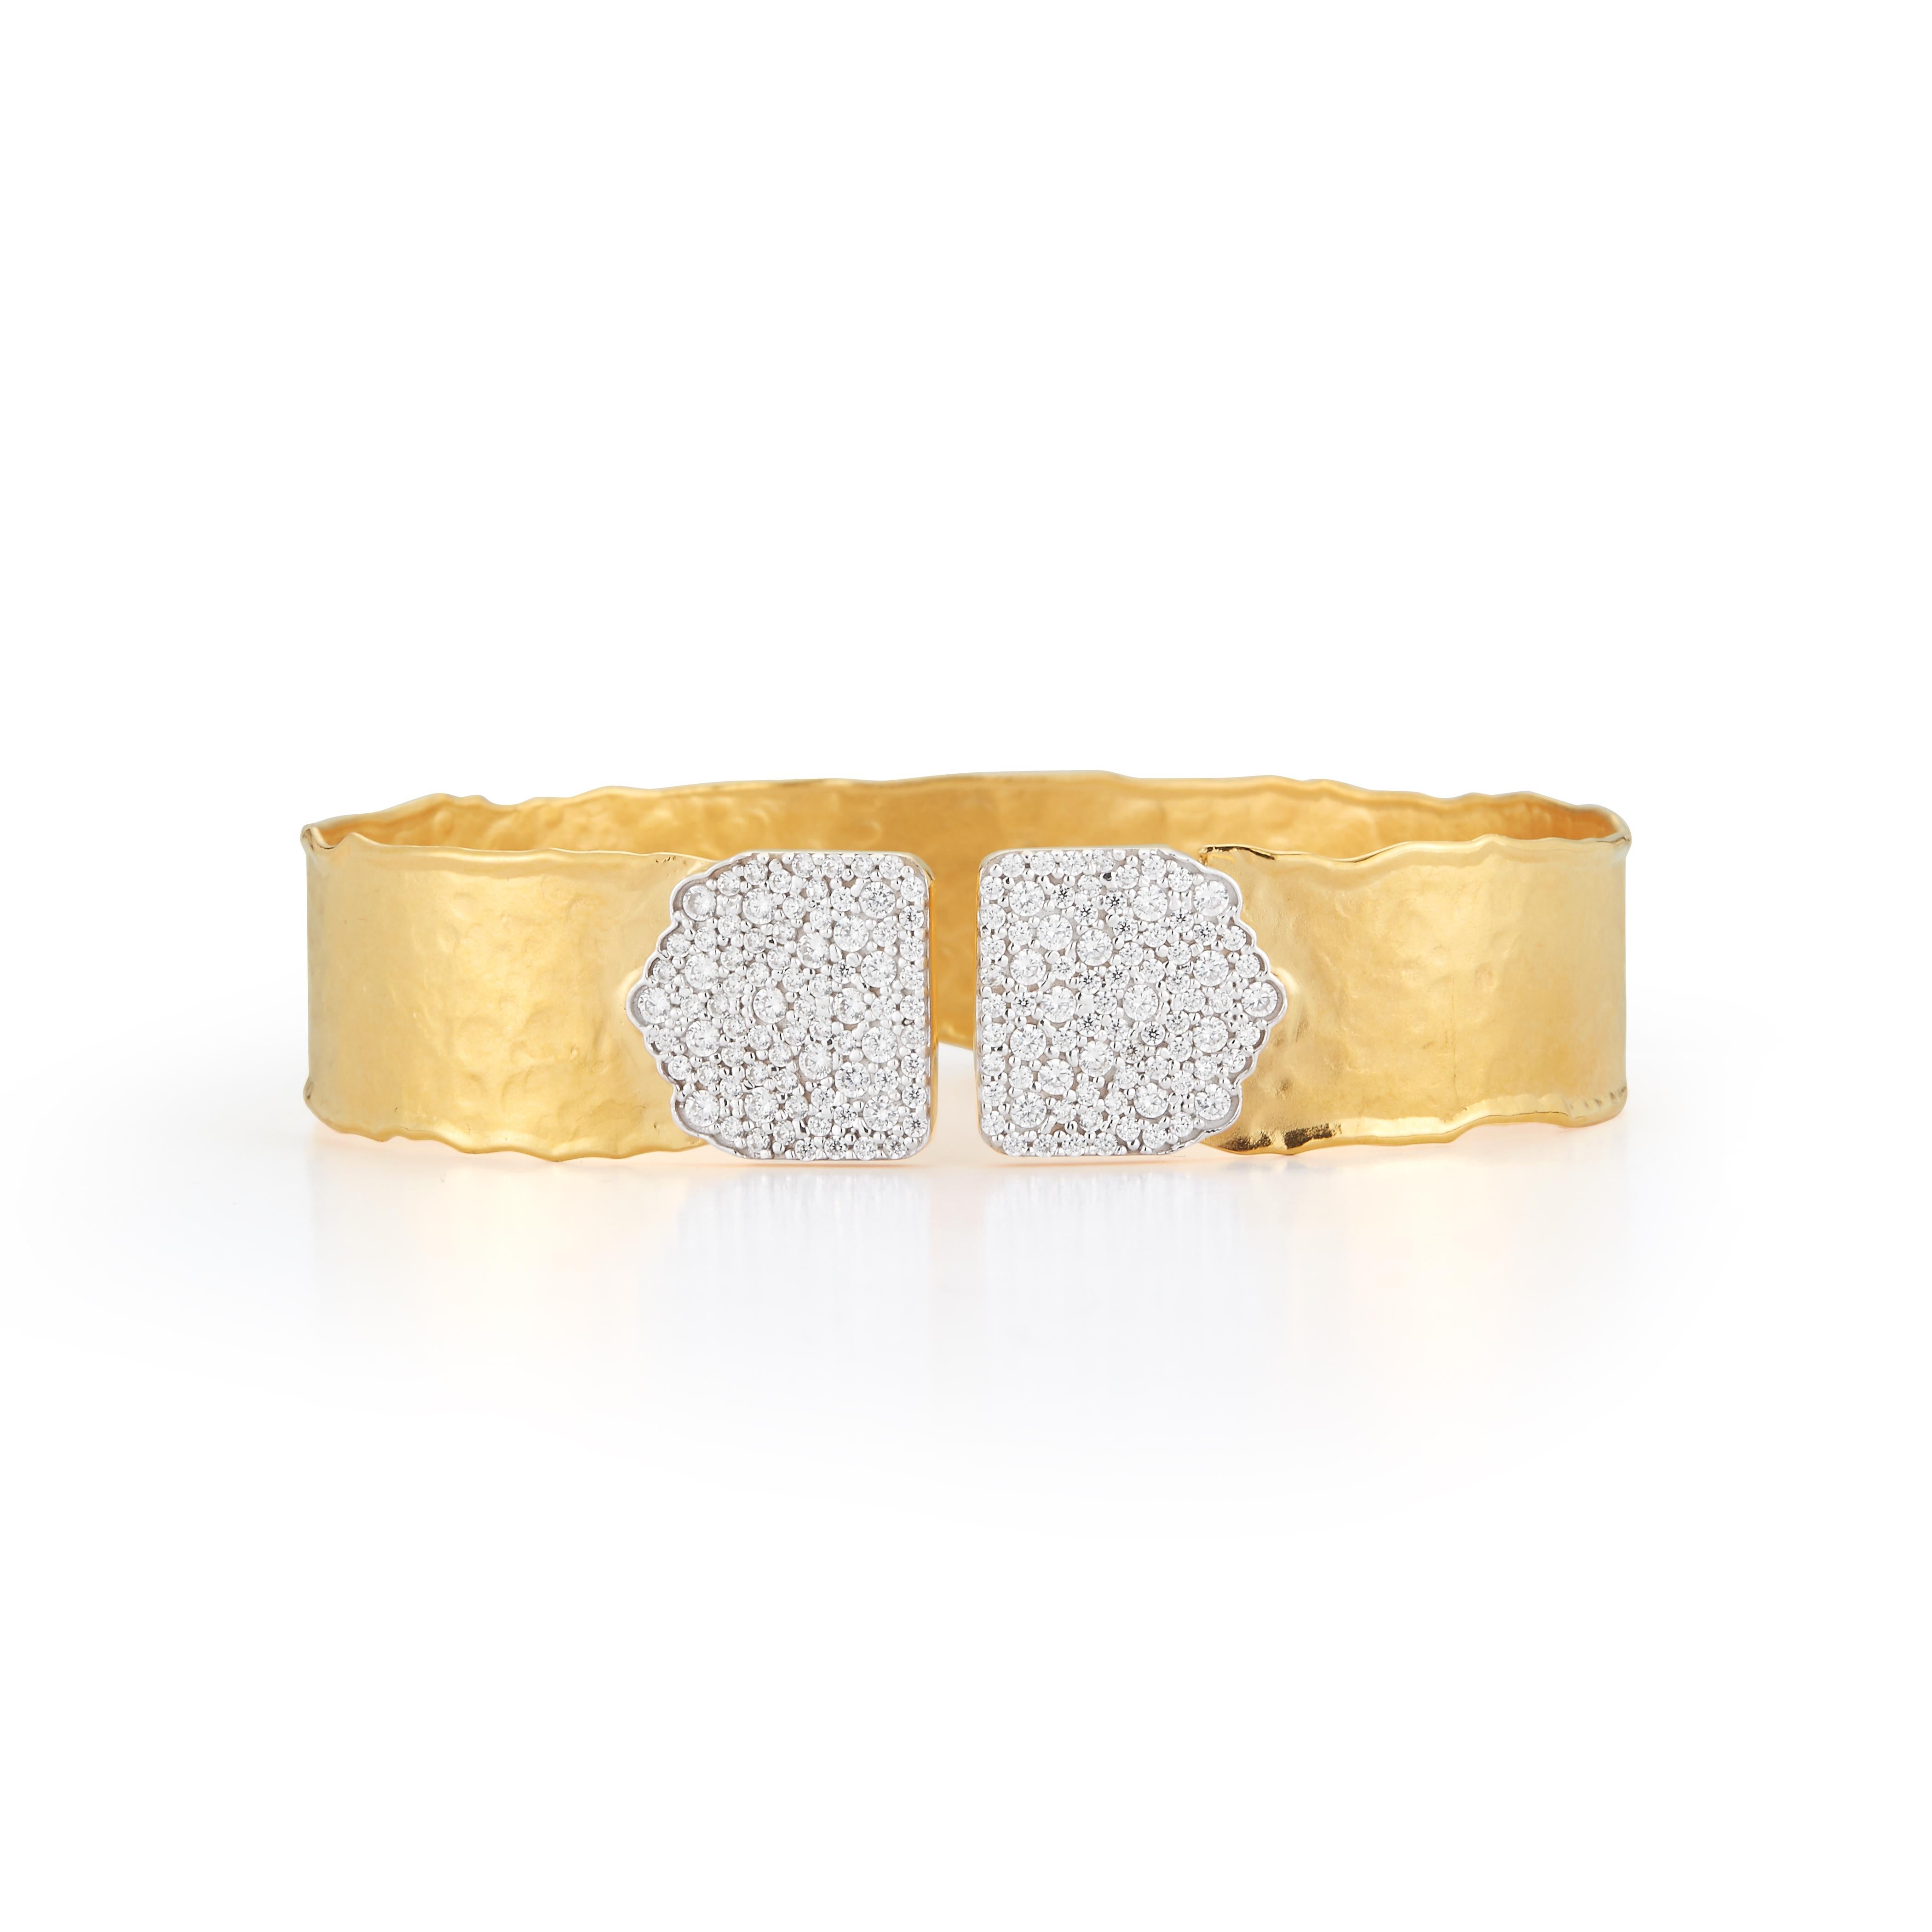 14 Karat Yellow Gold Hand-Crafted Matte and Hammer-Finished 14mm Scallop-Edged Cuff Bracelet, Enhanced with 1.54 Carats of Pave  Set Diamonds.
